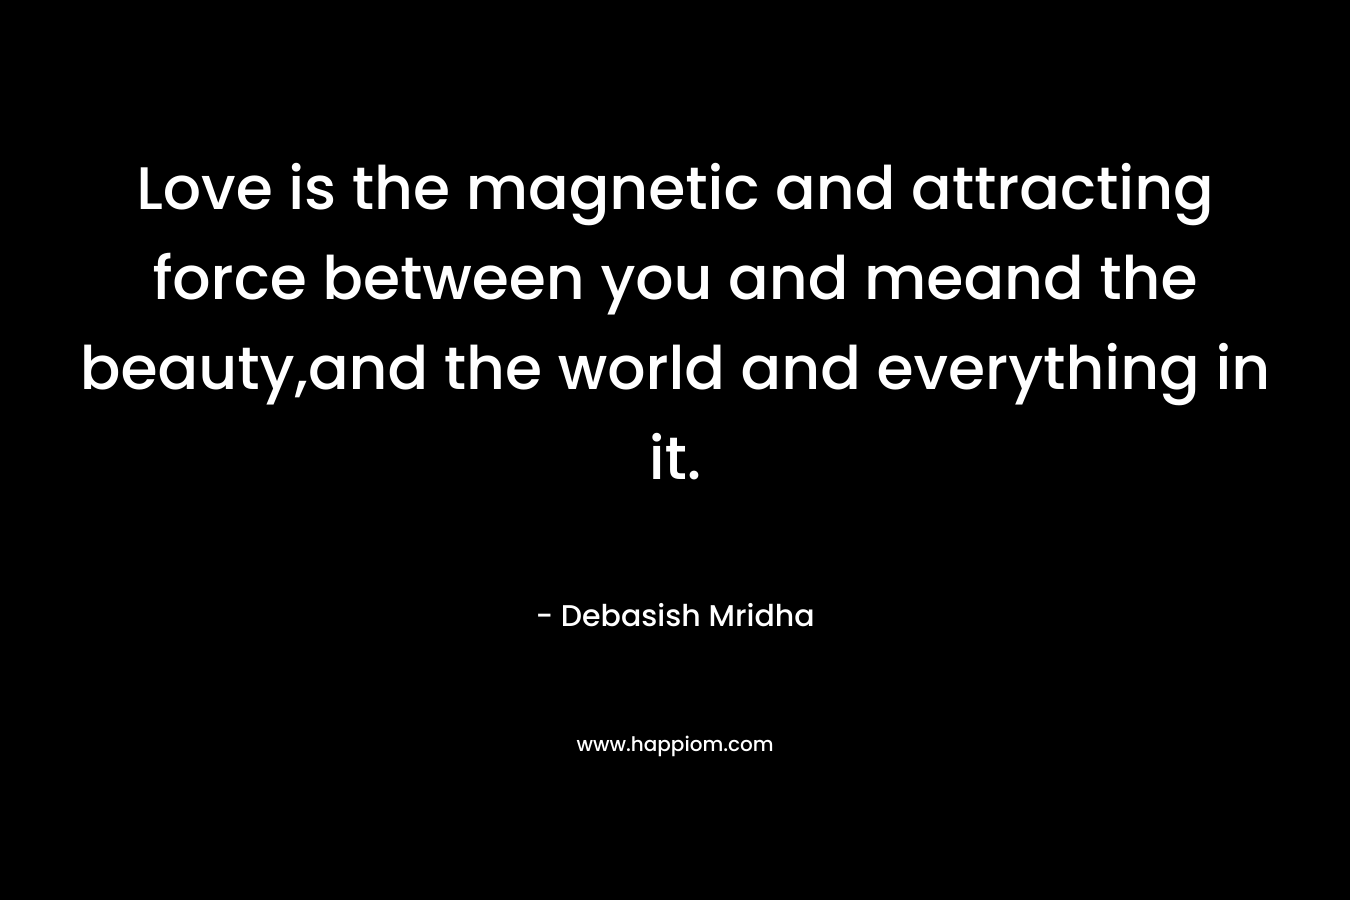 Love is the magnetic and attracting force between you and meand the beauty,and the world and everything in it.